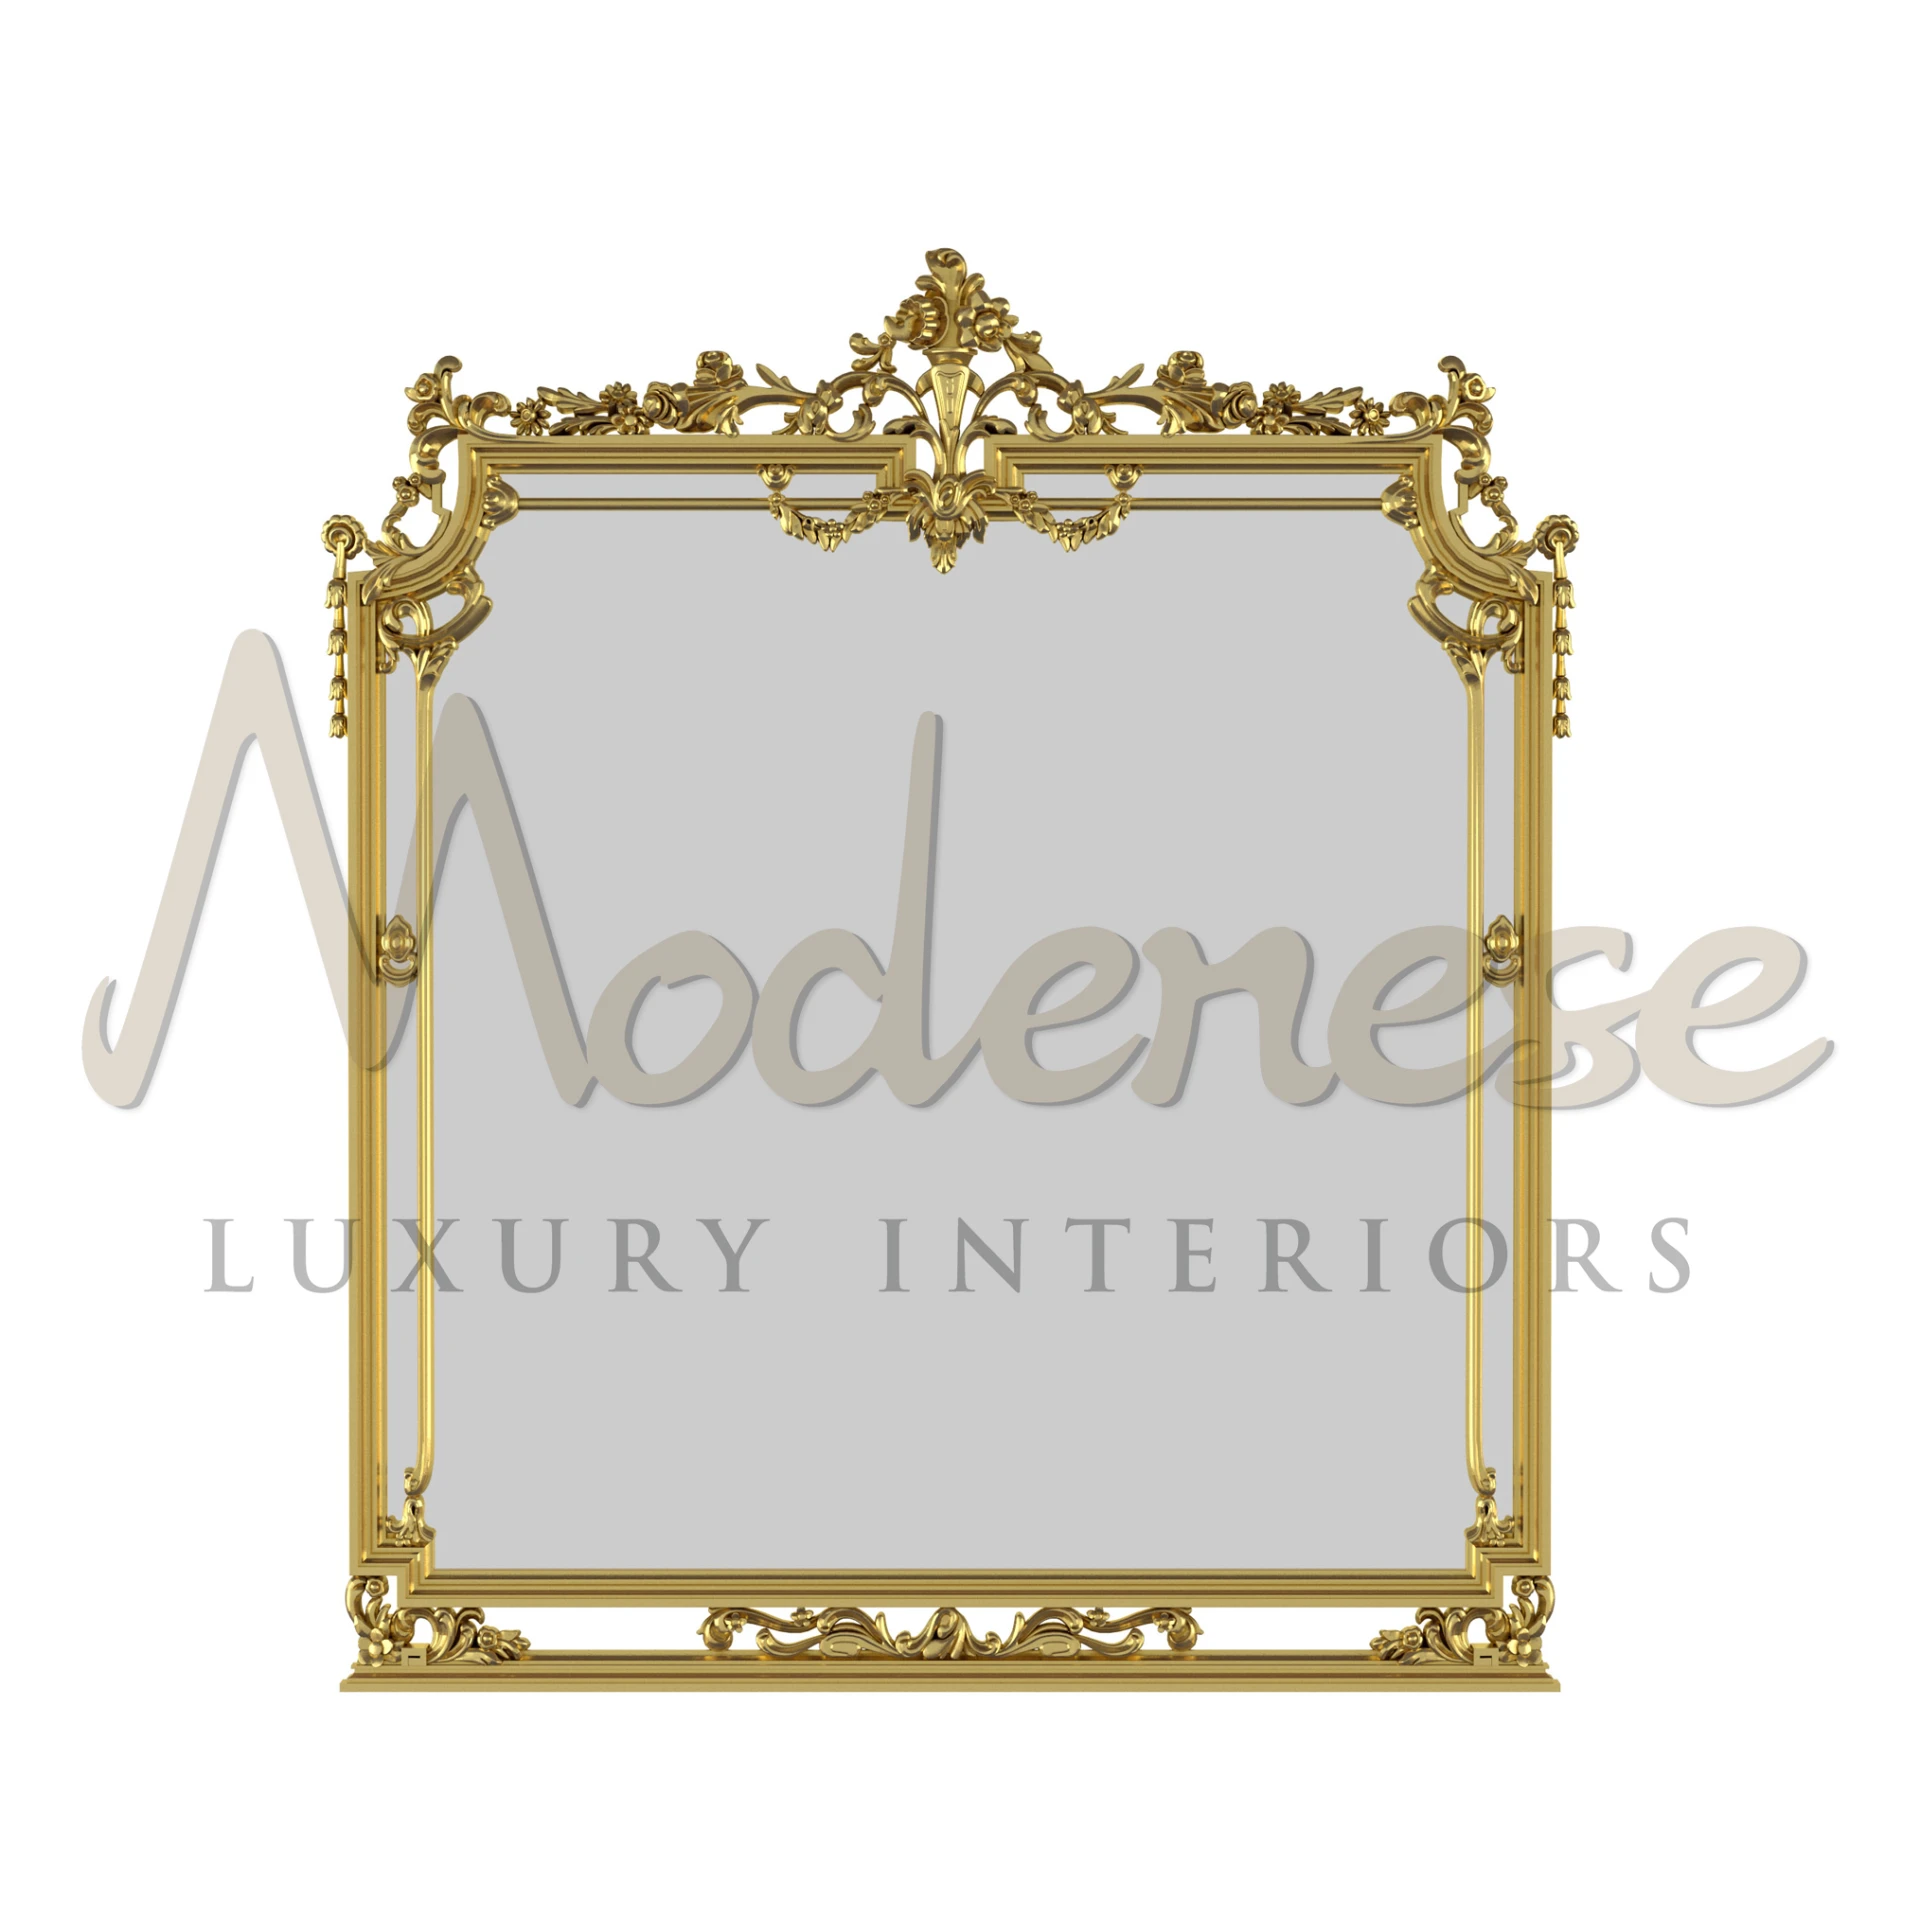 Gold-finished classic Opulent Mirror

